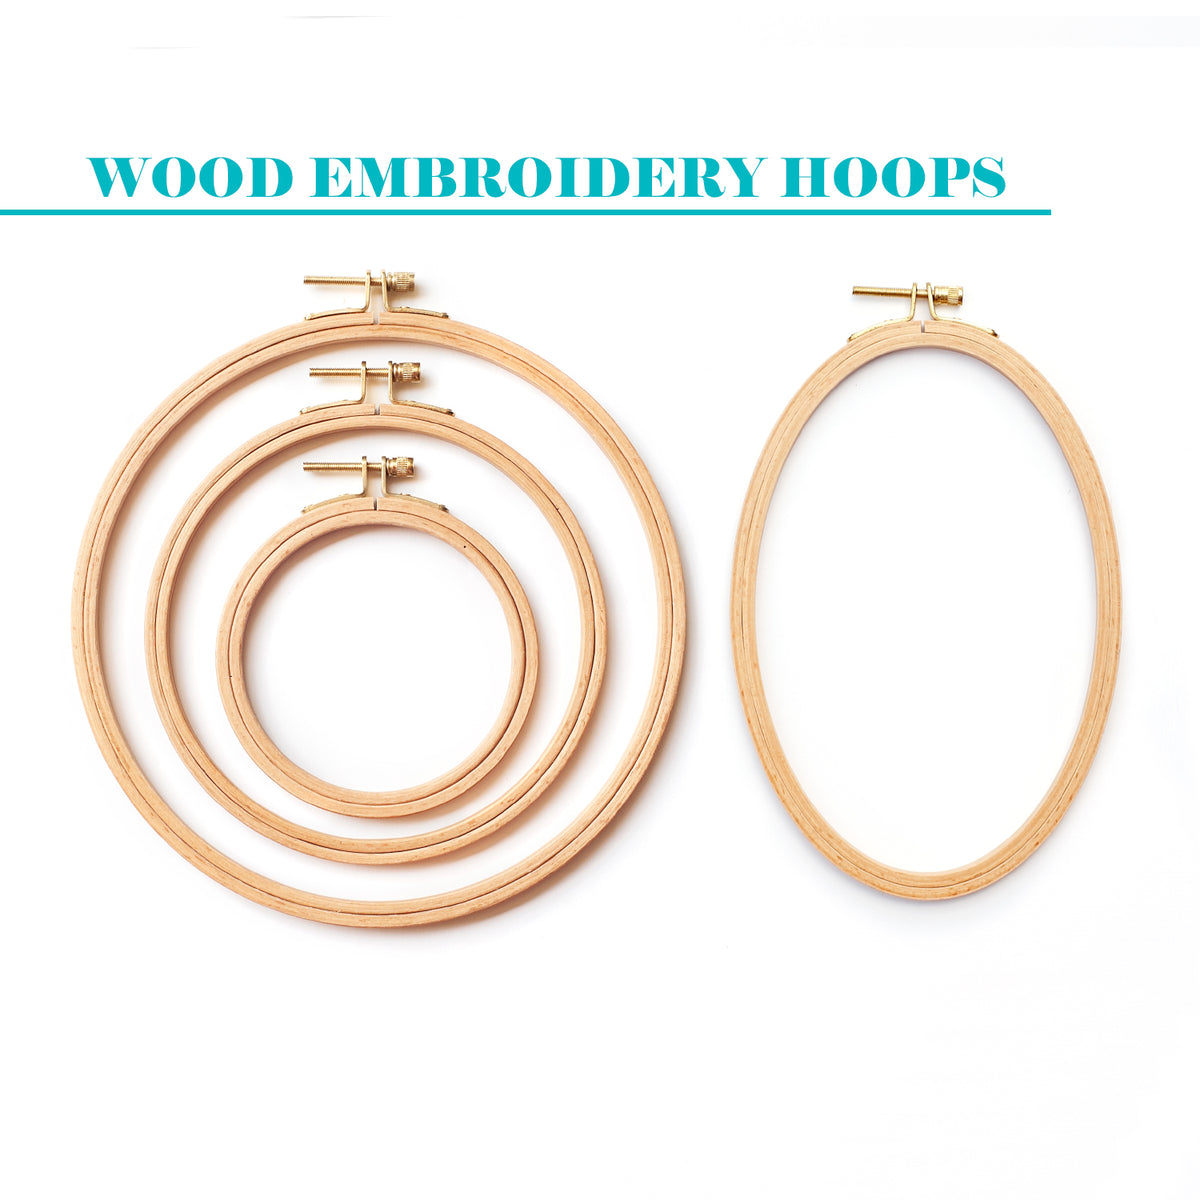 youci beech wood embroidery hoop, 2 packs 9 inch cross stitch hoops, round  embroidery frame for art craft sewing and decorative han